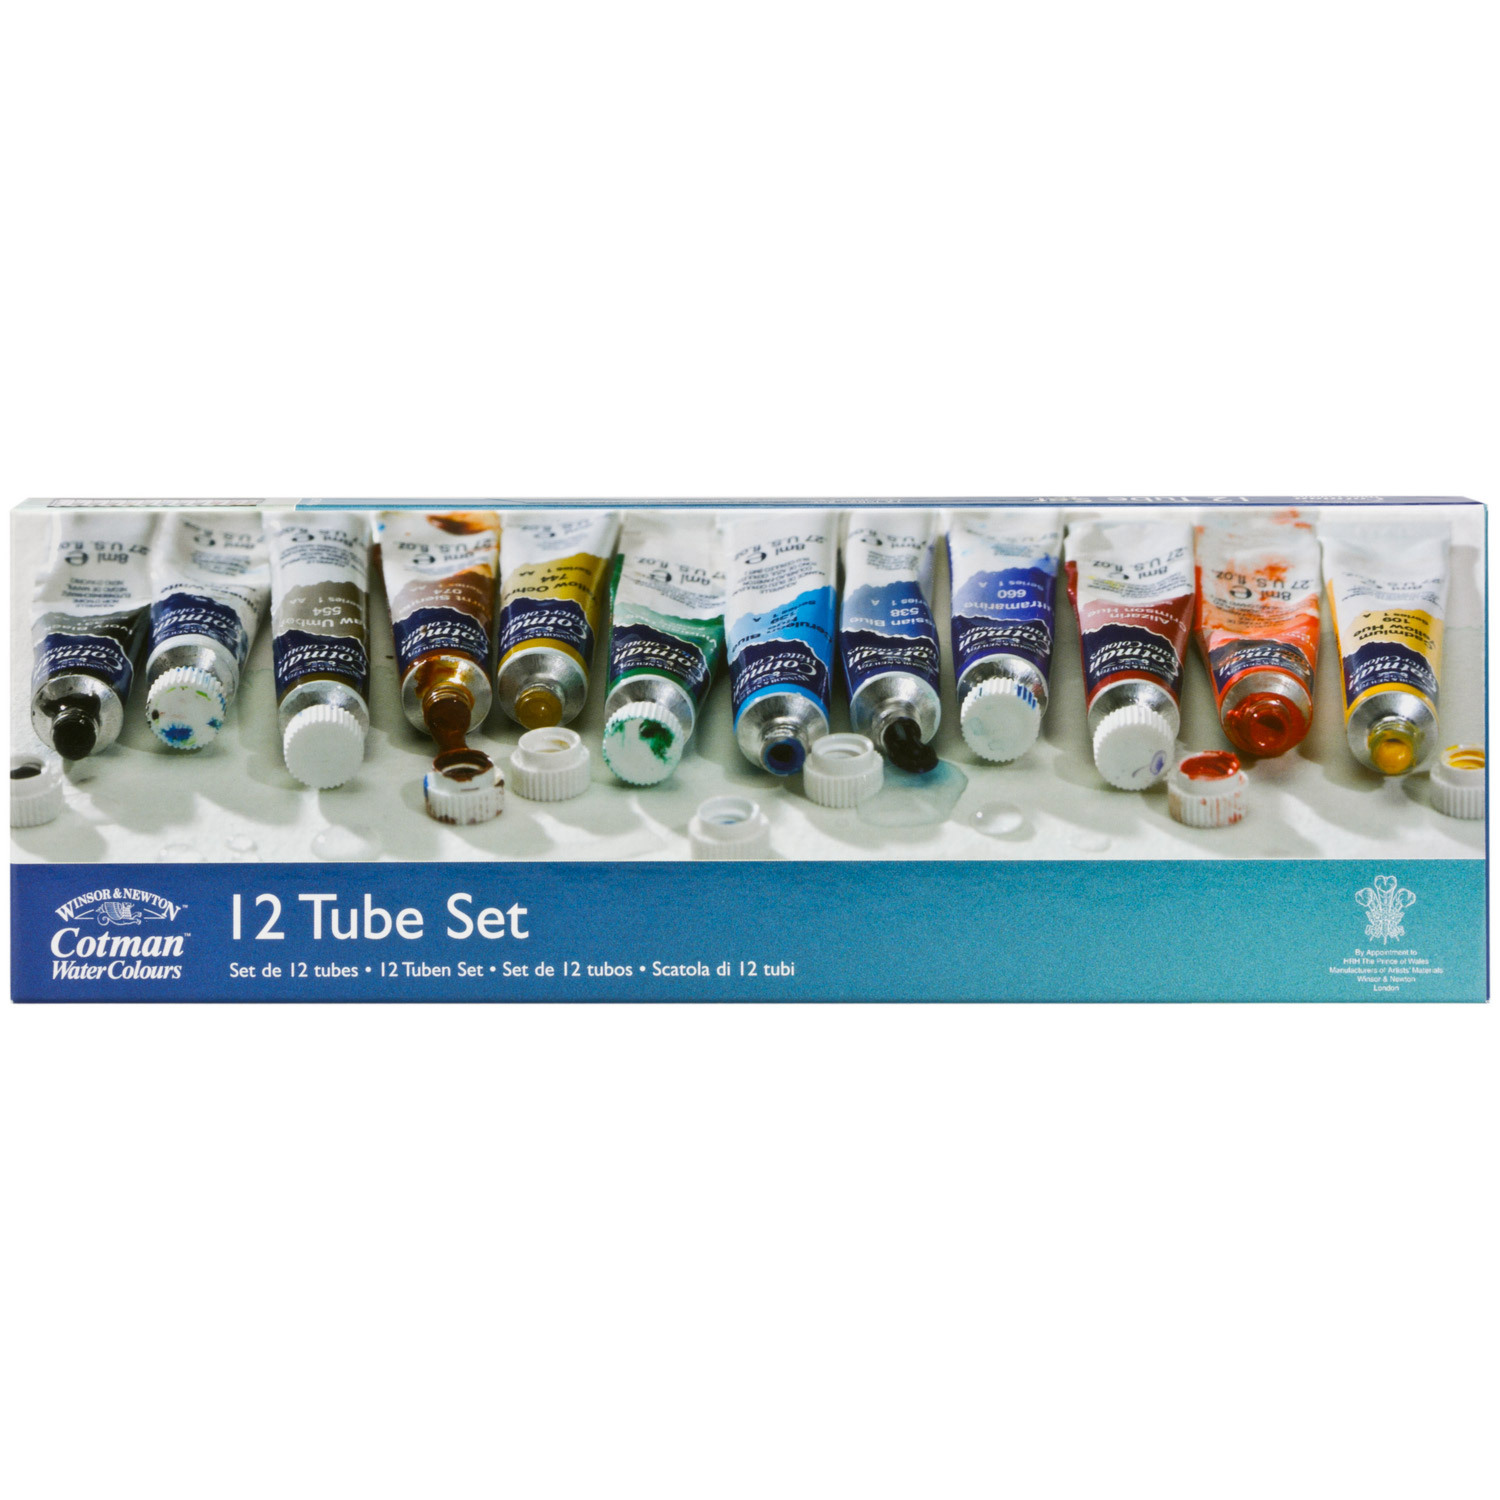 Winsor and Newton Cotman Water Colour Tube Set Image 2